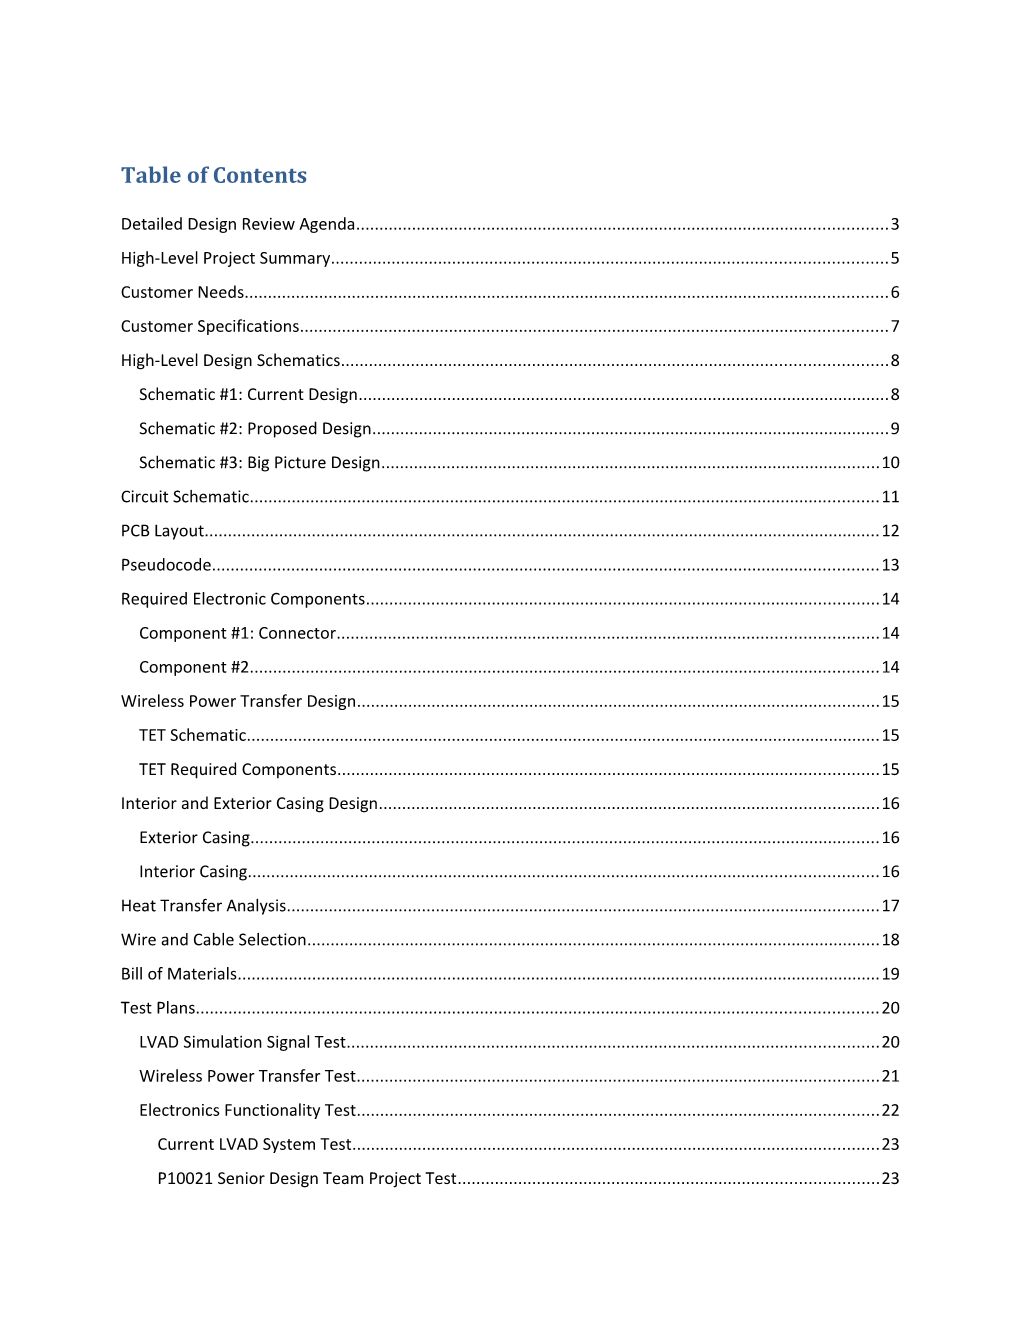 Table of Contents s393